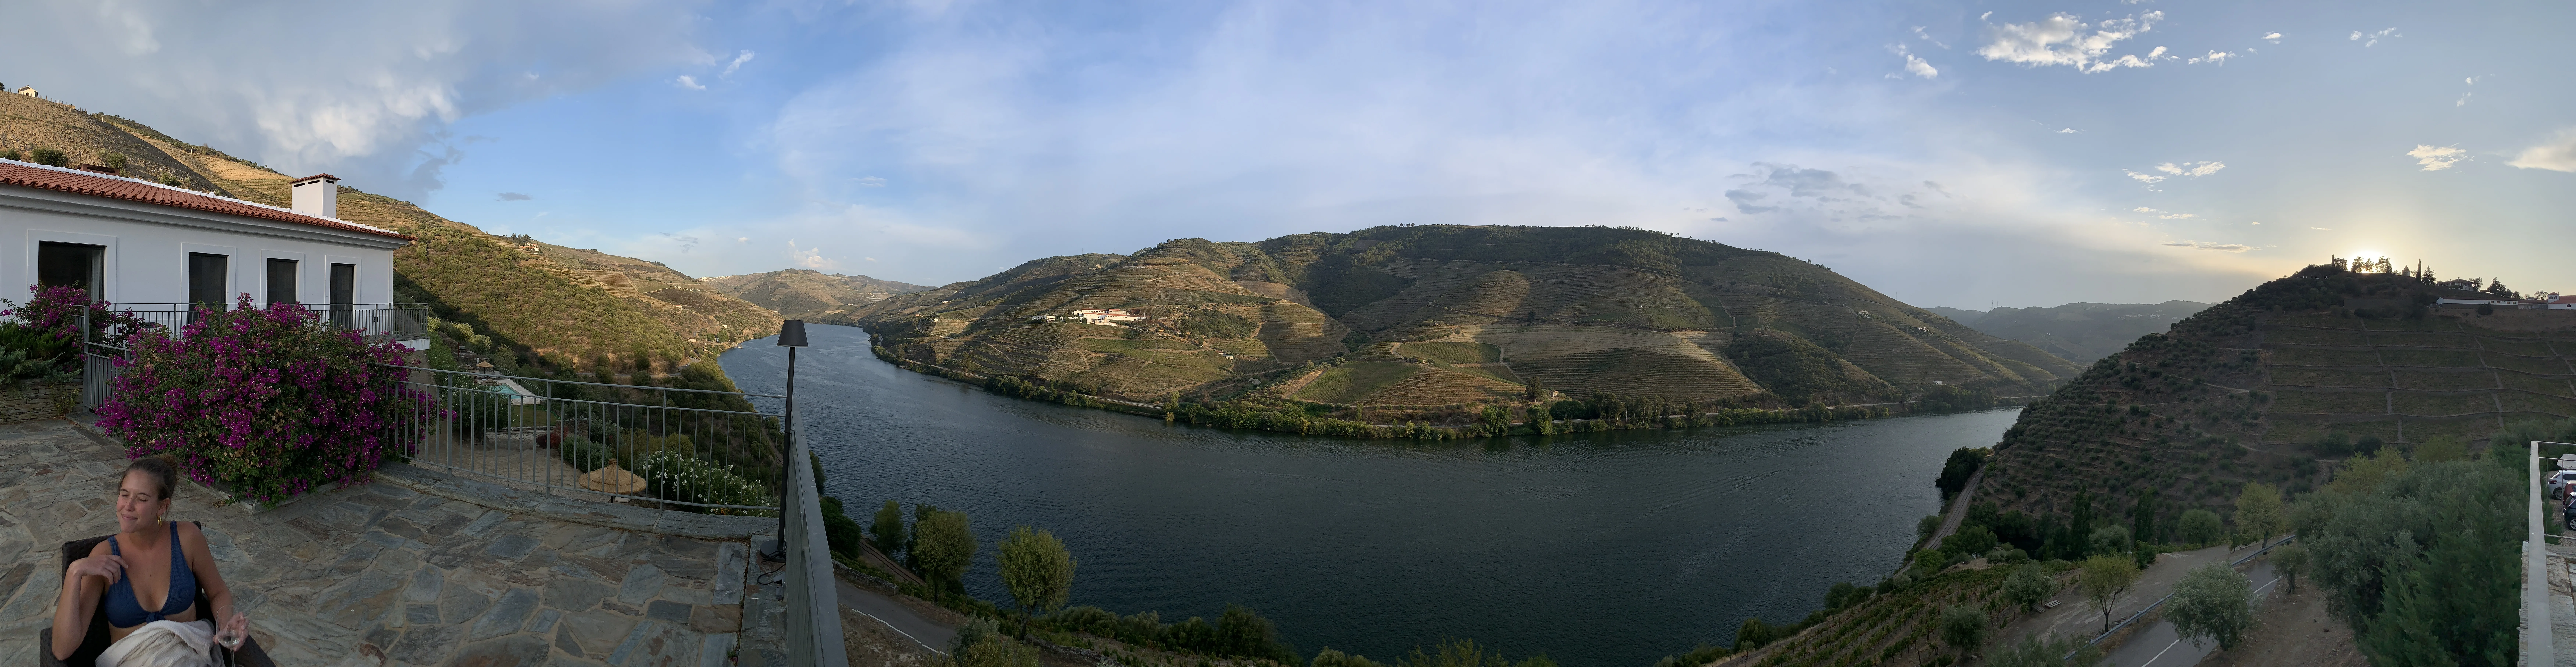 Panoramic view of the Douro Valley river and wine-terraced hills